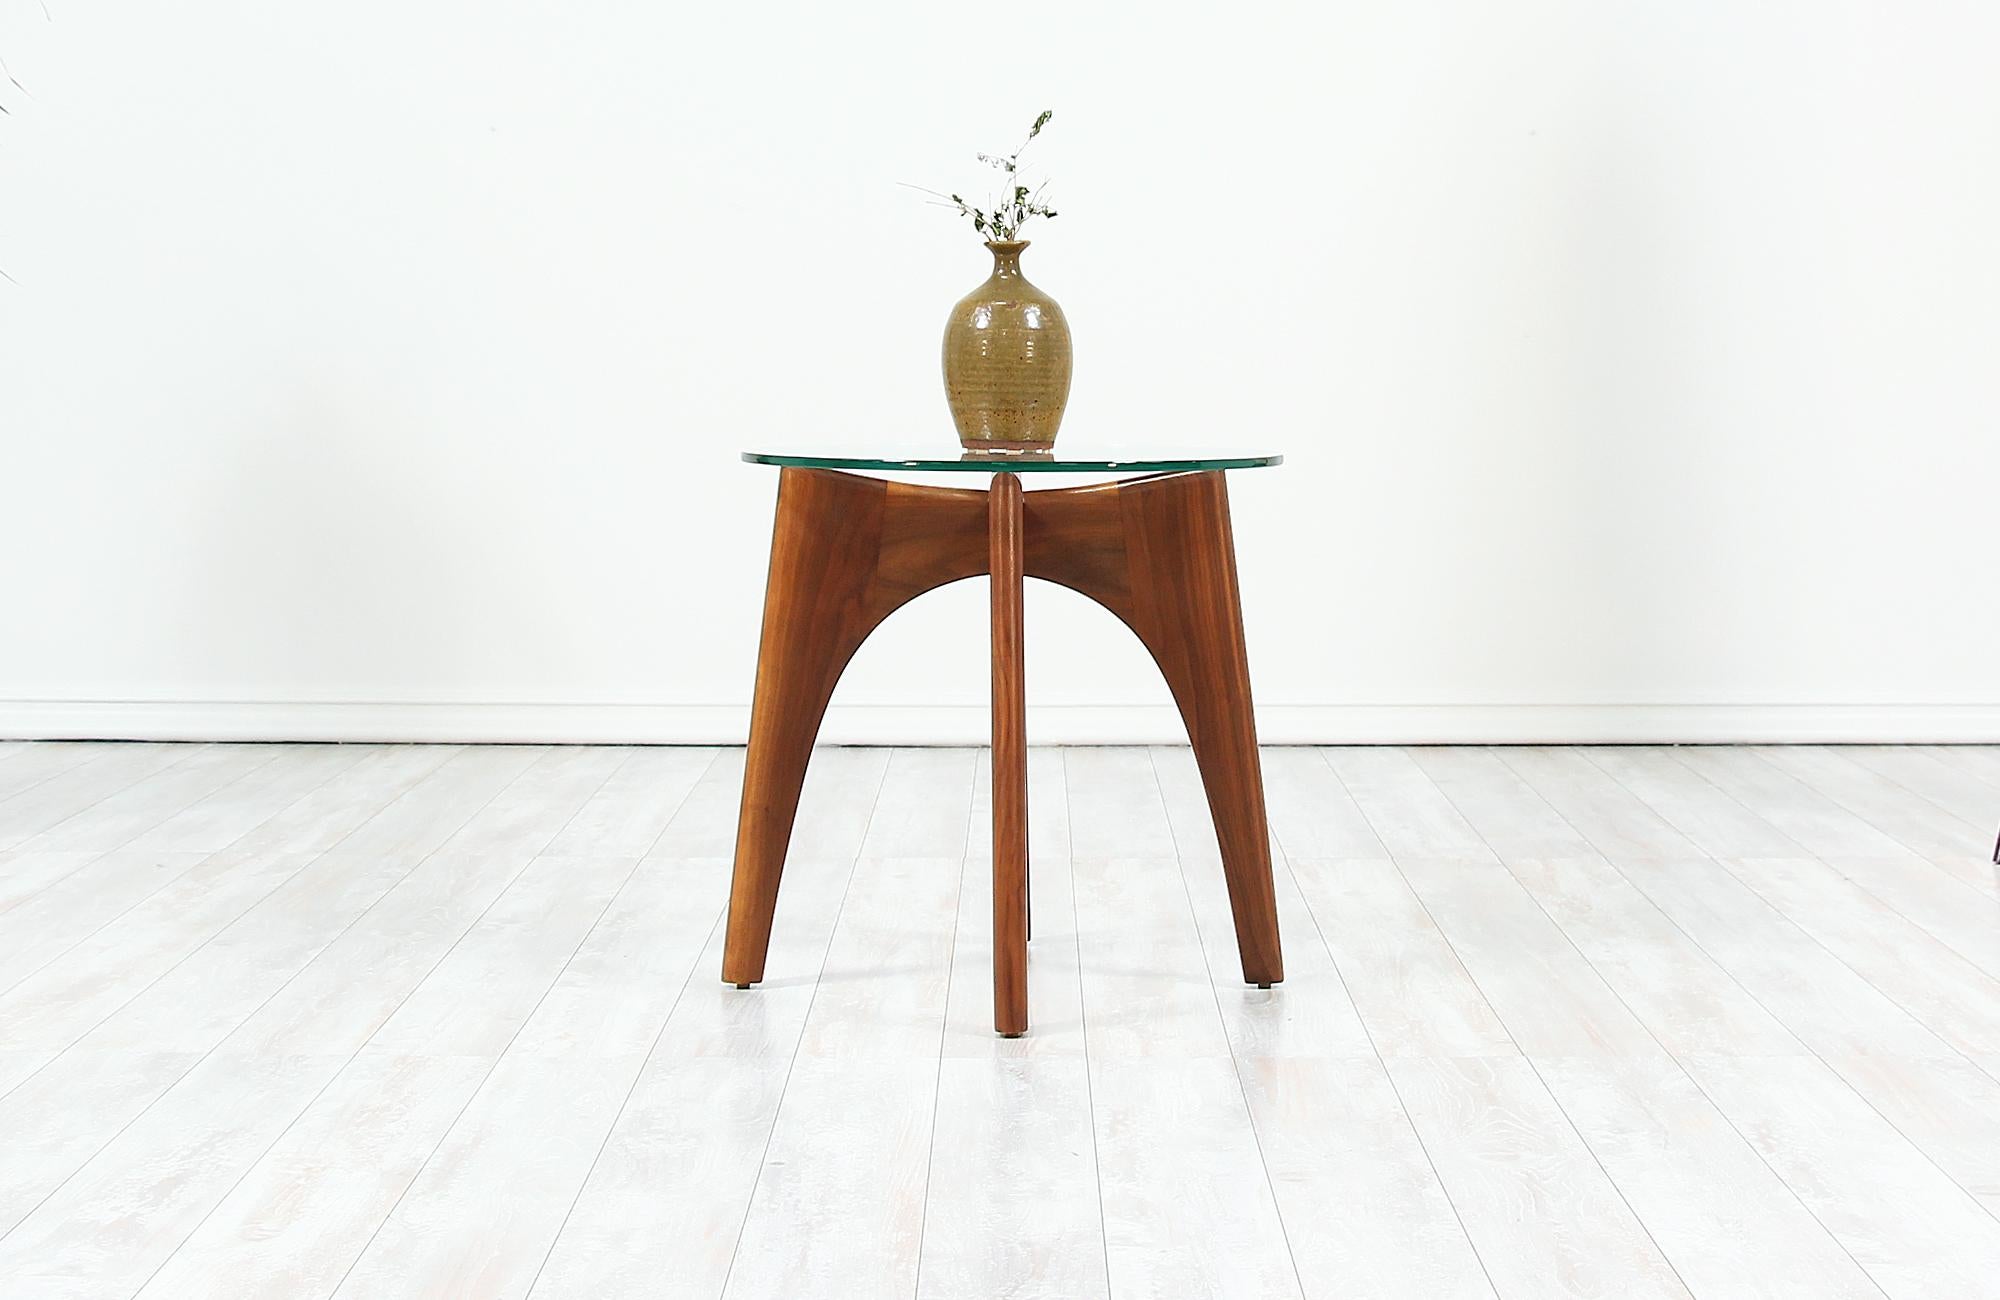 Glass Adrian Pearsall Sculpted Walnut Side Tables for Craft Associates